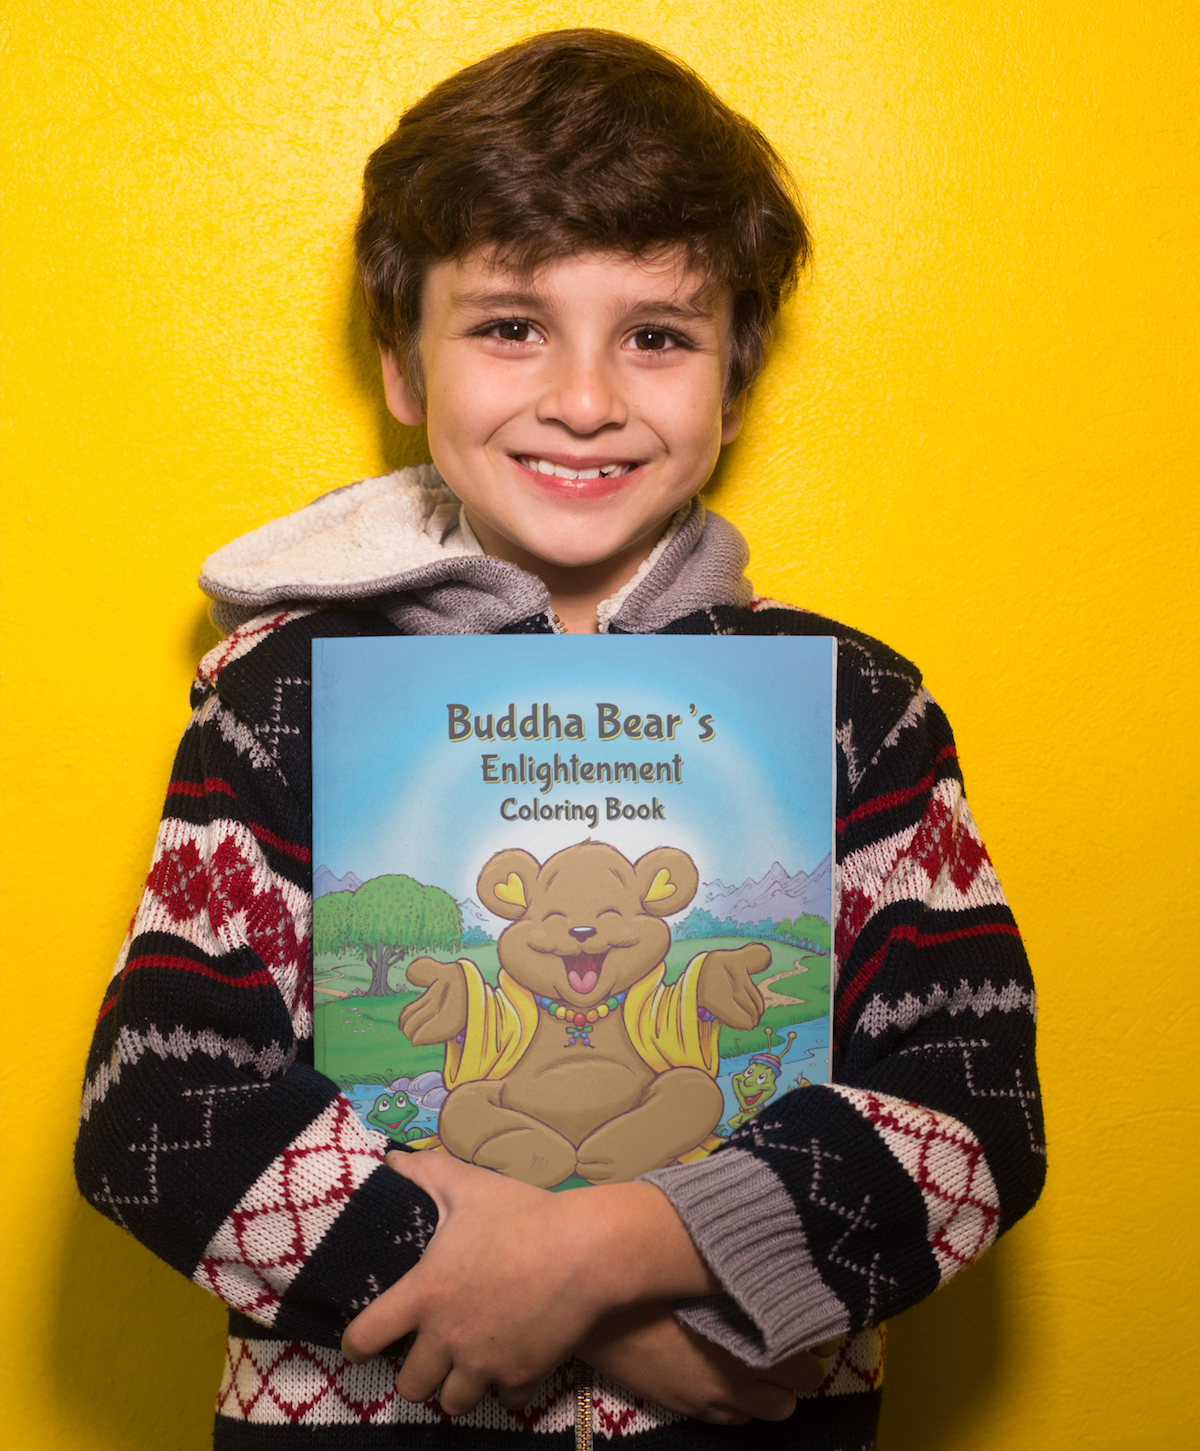 Child with Buddha Bear's Enlightenment Coloring Book